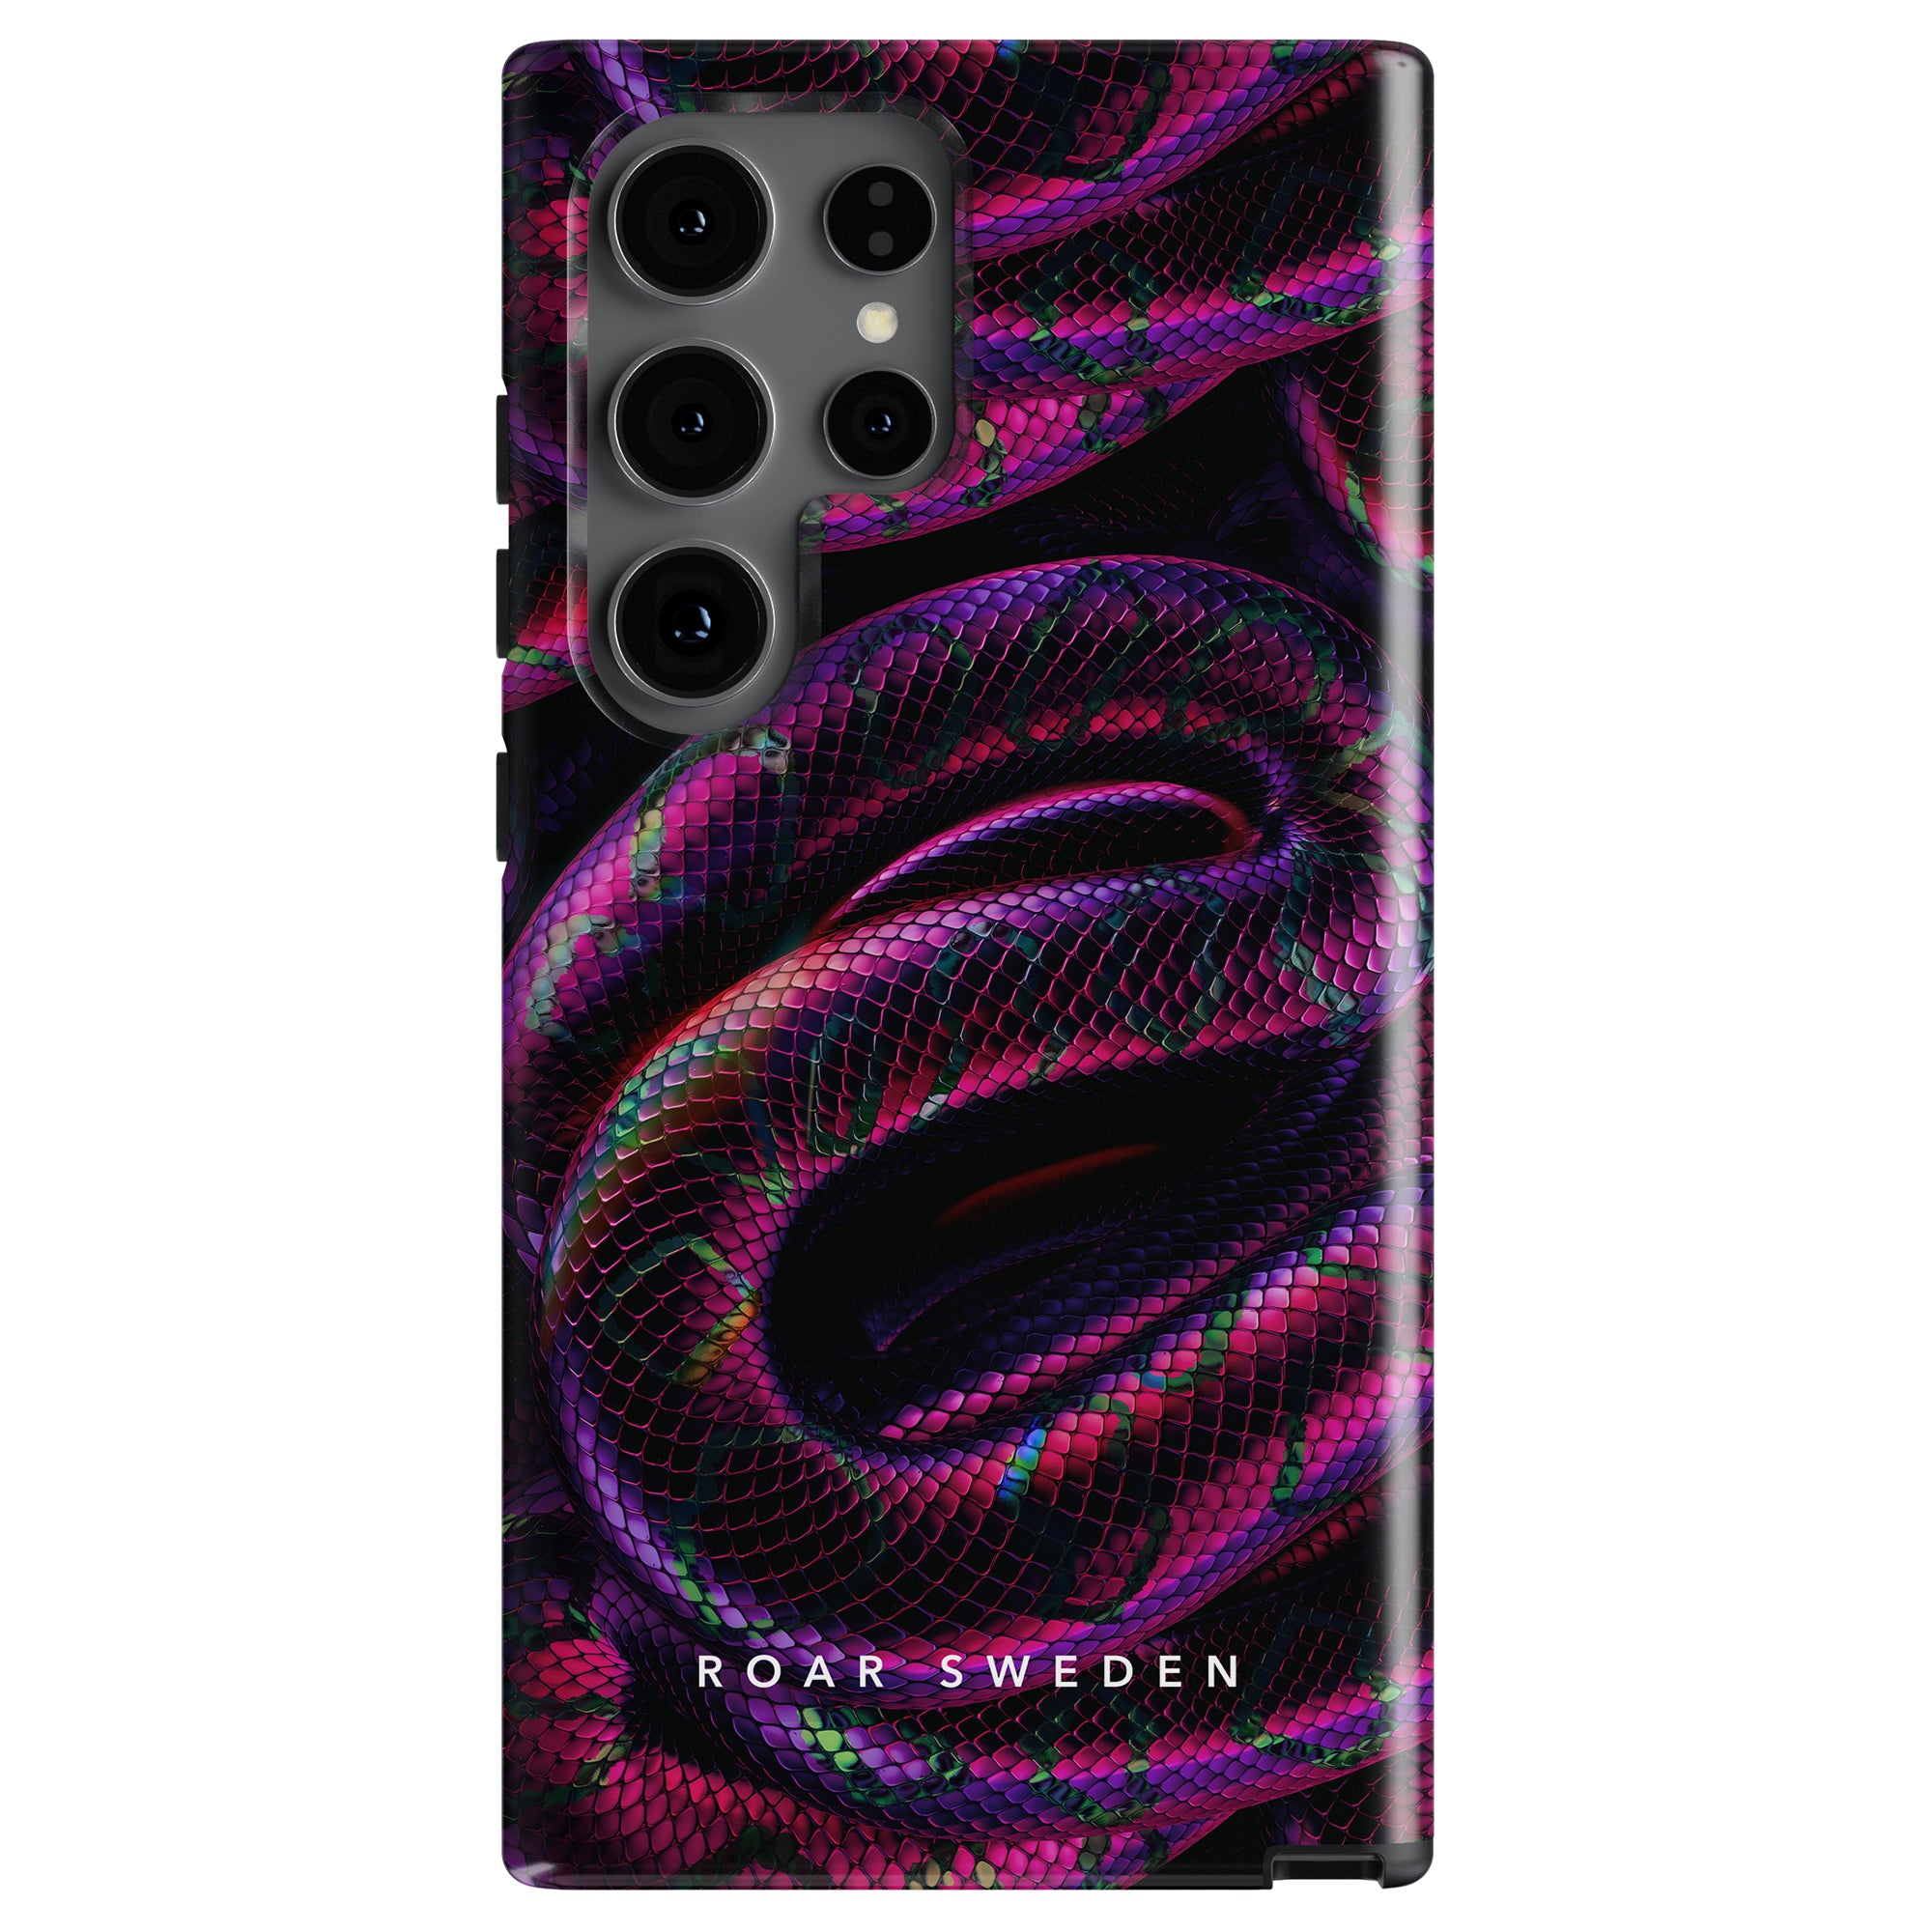 Phone case featuring a coiled snake design in vivid pink and purple hues, with "Roar Sweden" text at the bottom. This Venom - Tough Case boasts a unique snakeskin-mönster that adds an extra layer of style and protection.